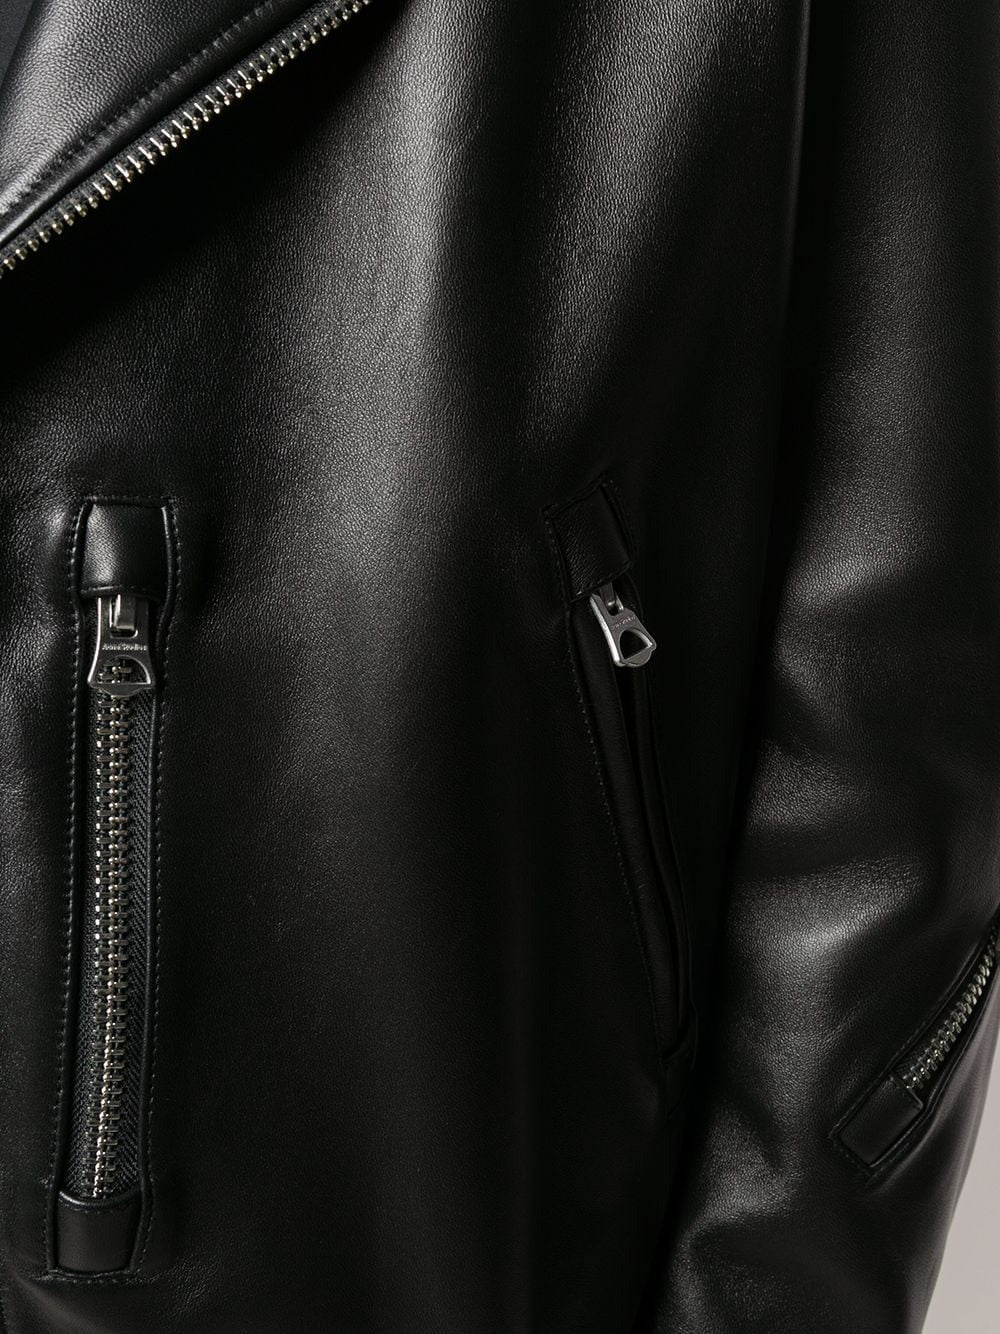 ACNE STUDIOS-LEATHER OUTERWEAR-B70075 900